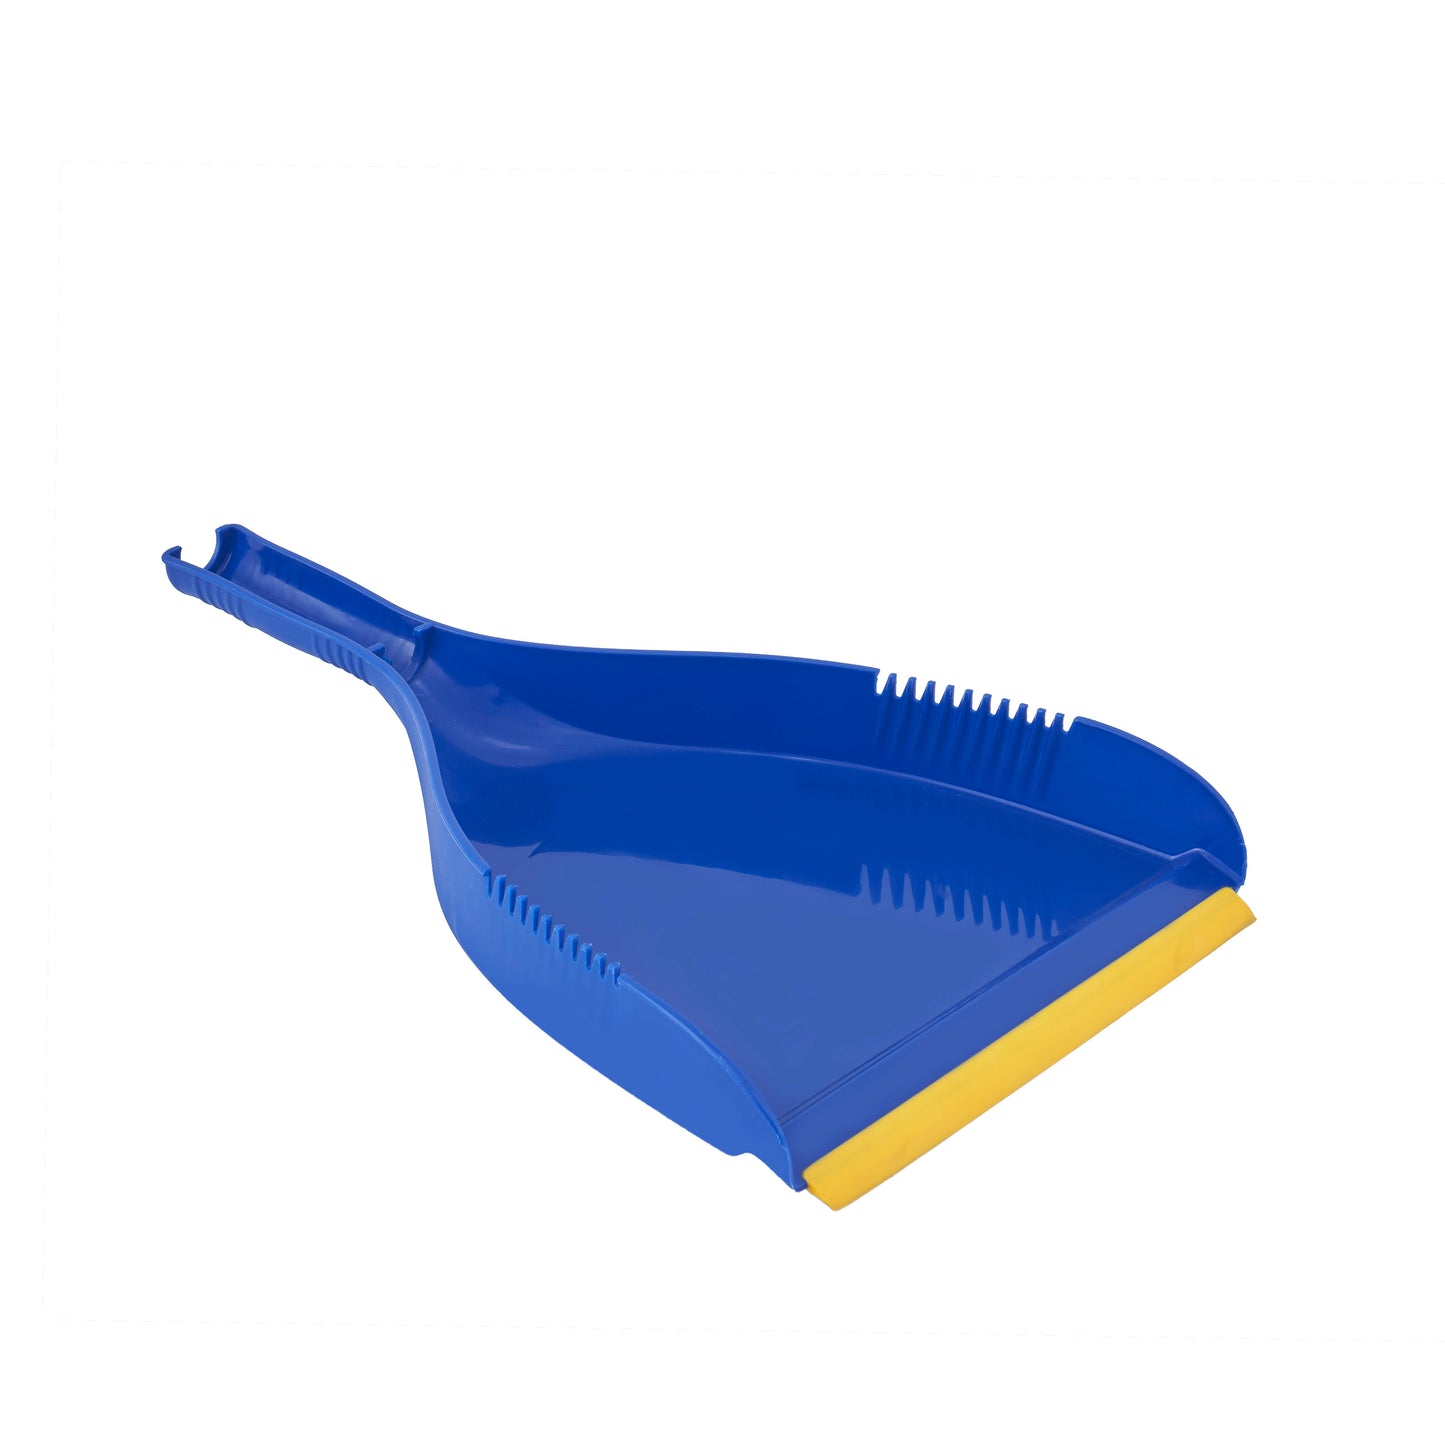 Clip-On Dust Pan with Built-In Comb.